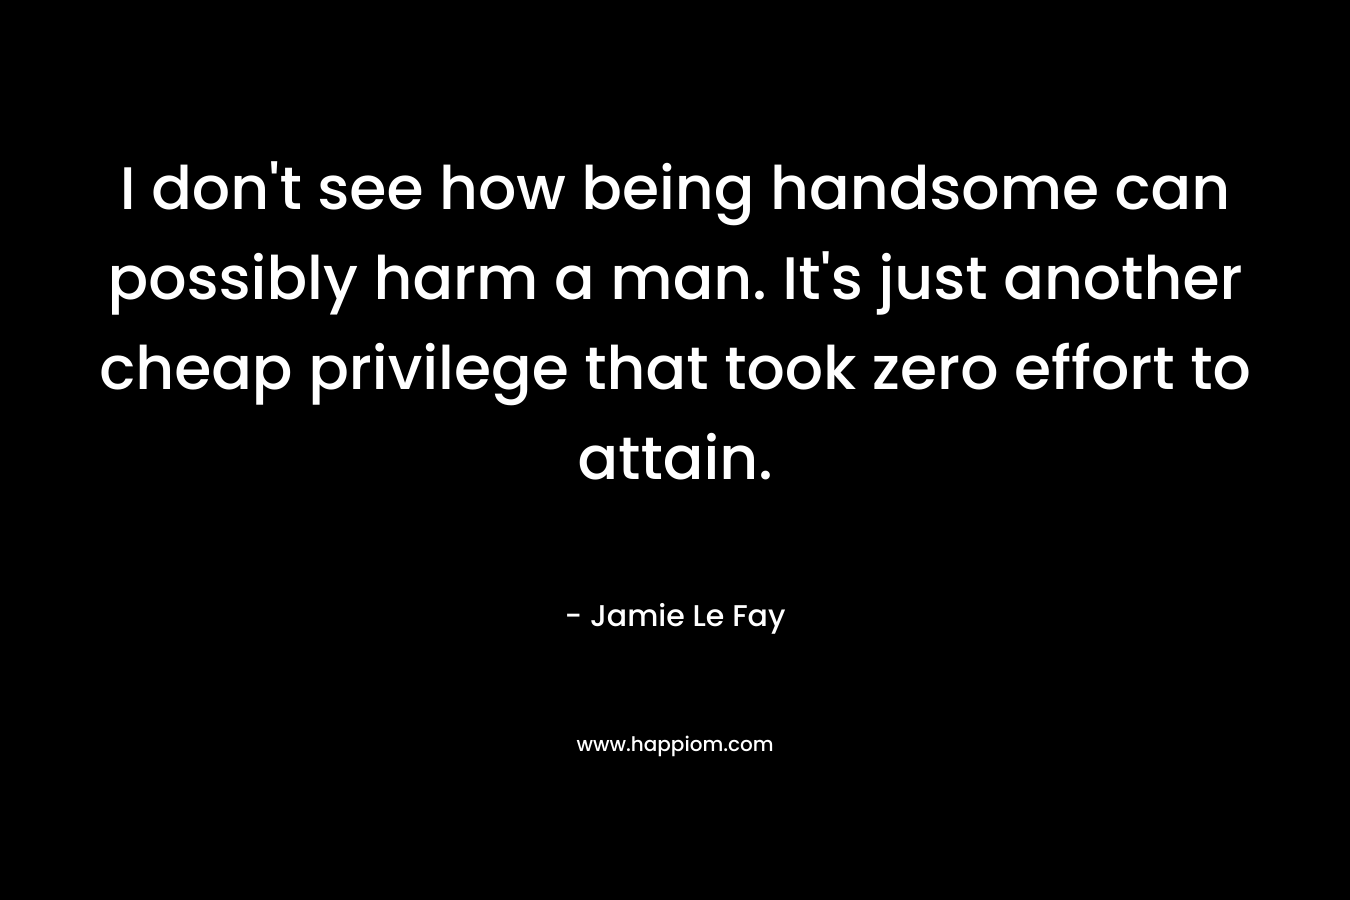 I don't see how being handsome can possibly harm a man. It's just another cheap privilege that took zero effort to attain.